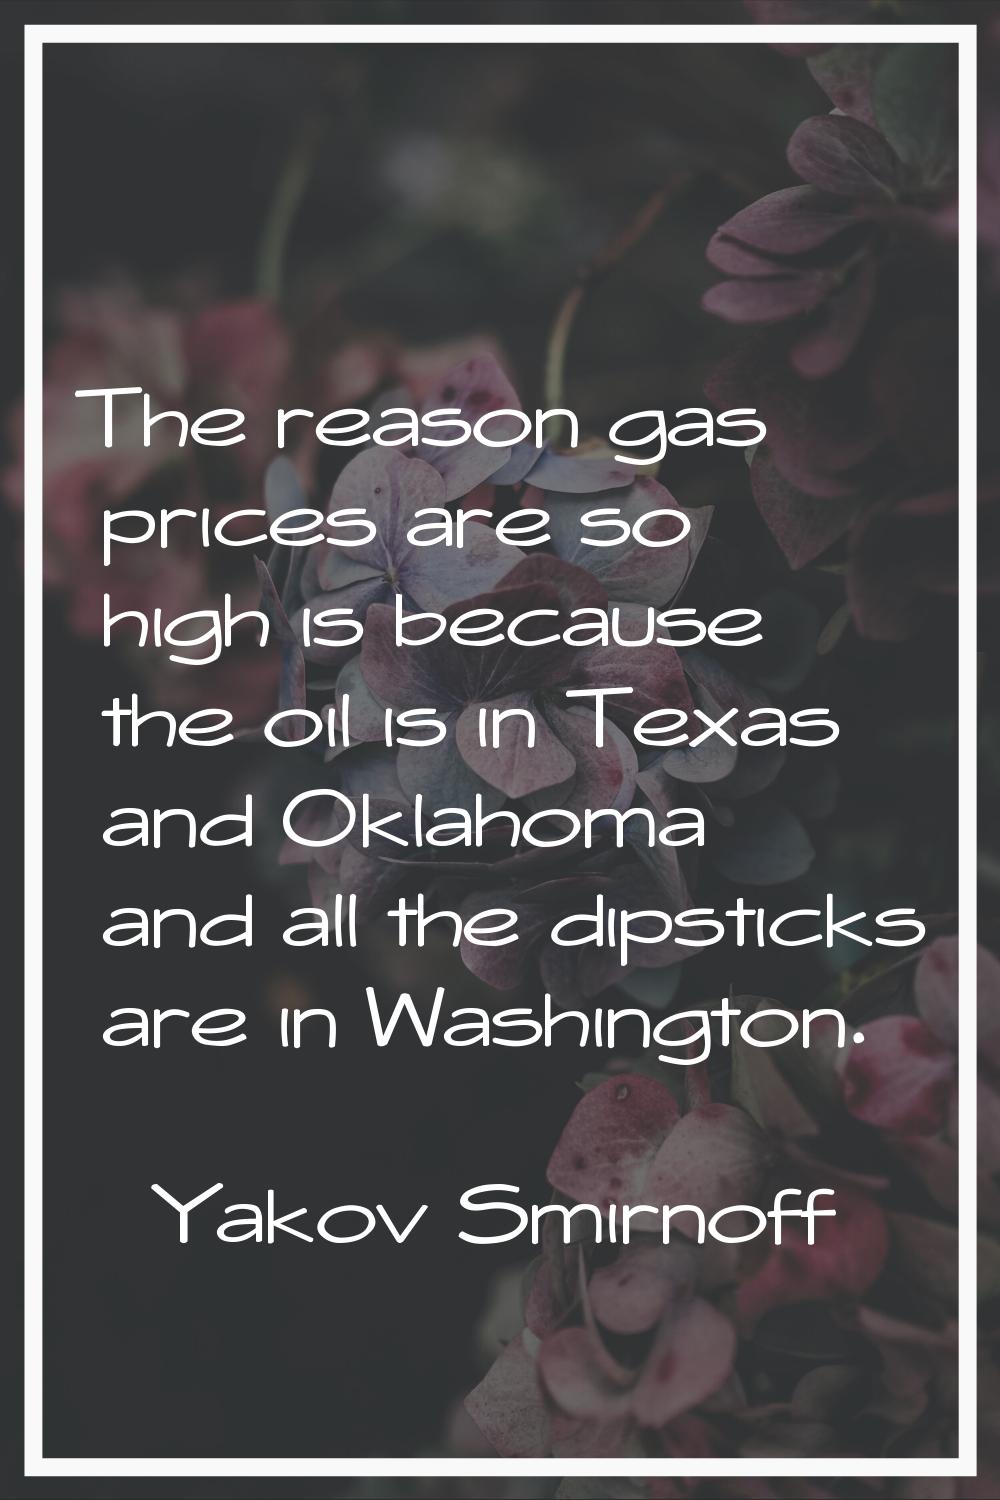 The reason gas prices are so high is because the oil is in Texas and Oklahoma and all the dipsticks